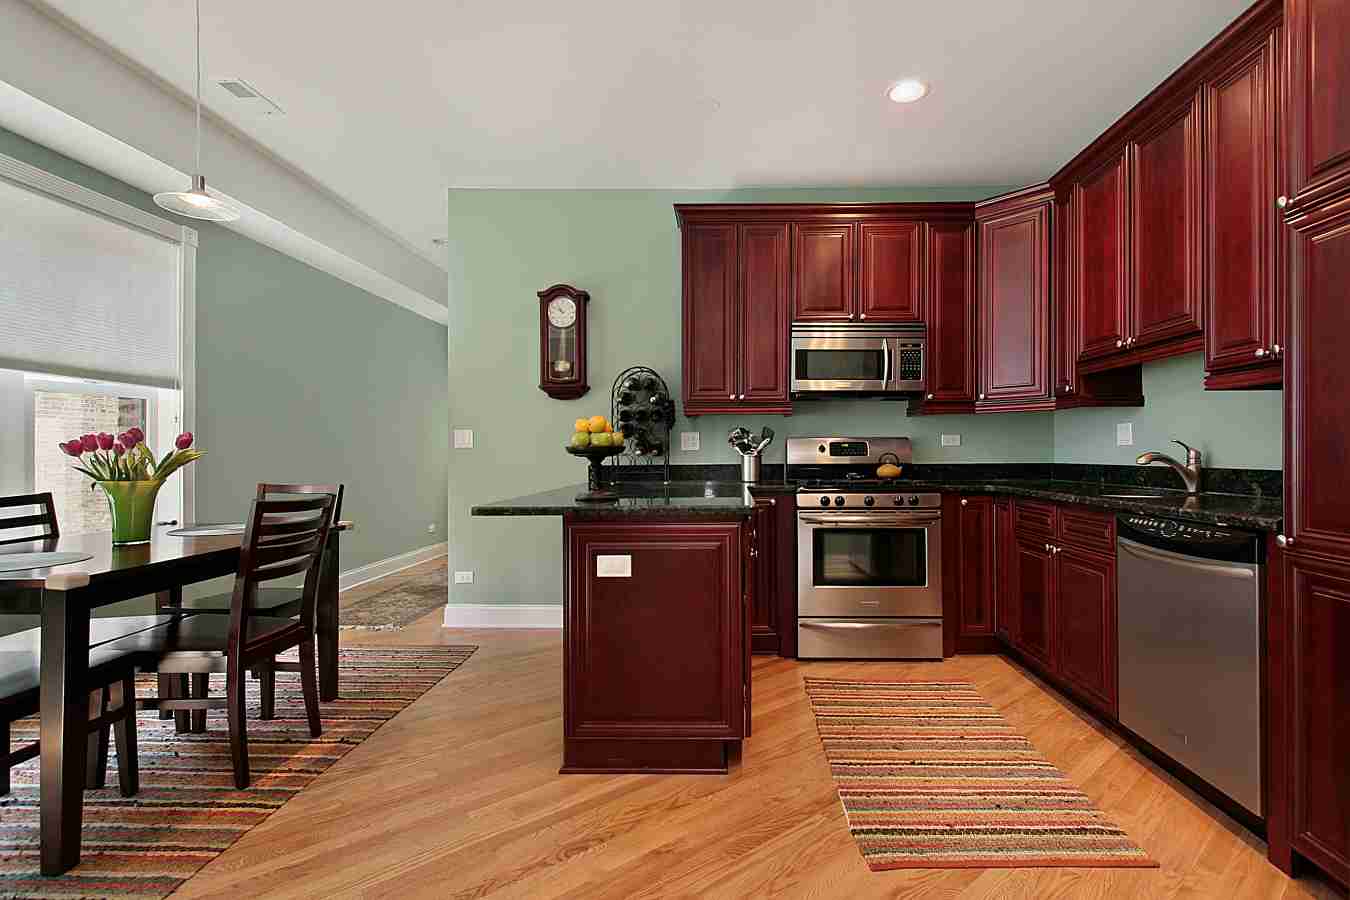 Cherry cabinets with contrasting green walls